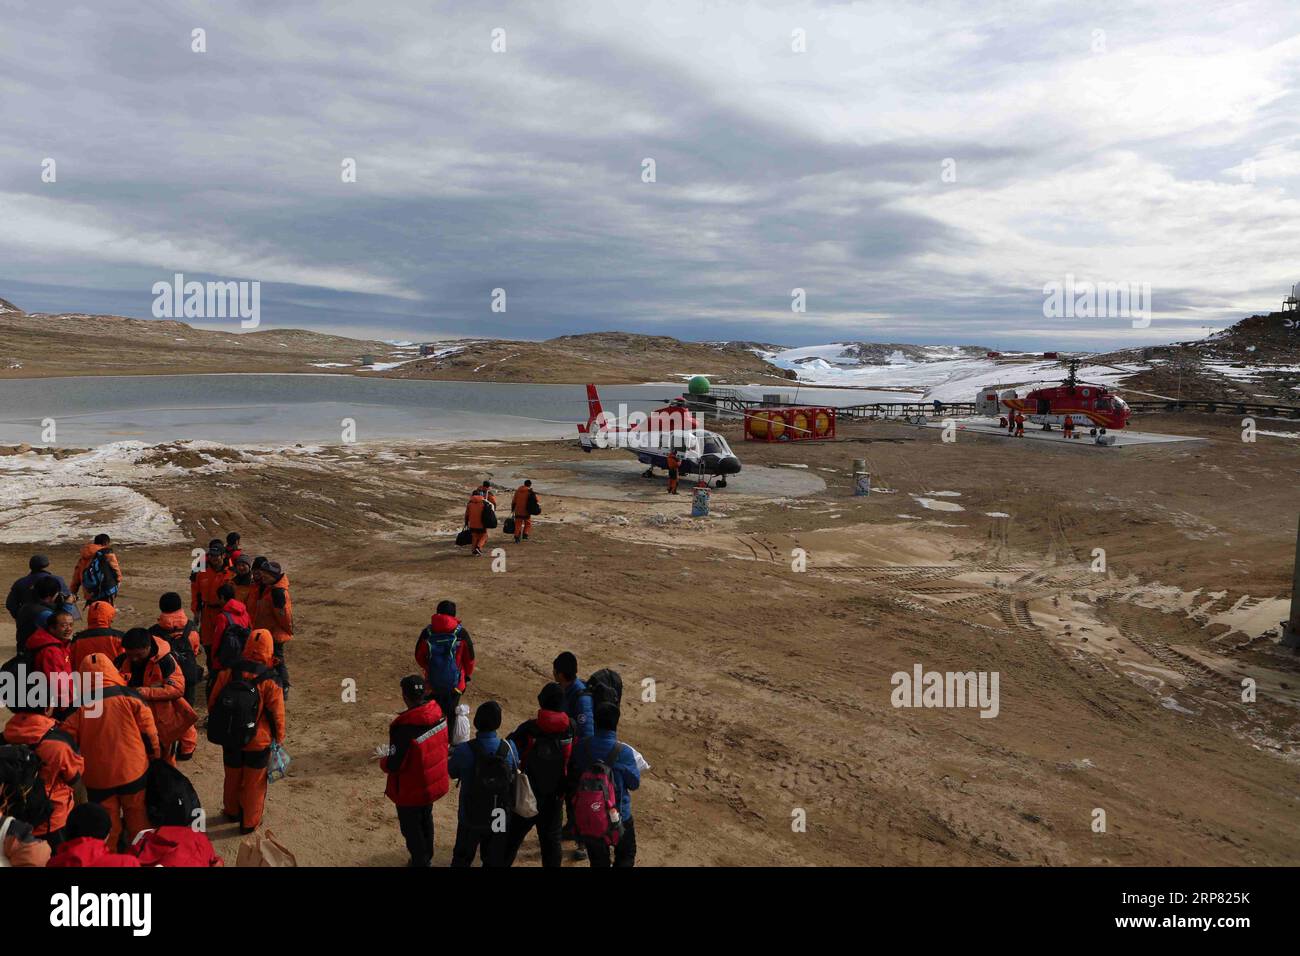 (190215) -- ABOARD XUELONG, Feb. 15, 2019 (Xinhua) -- A helicopter picks up members of China s 35th Antarctic expedition team from the Zhongshan Station to China s research icebreaker Xuelong, Feb. 13, 2019. China s research icebreaker Xuelong, with 126 crew members aboard on the 35th Antarctic research mission, on Thursday local time left the Zhongshan Station on its way back to China. Snow Eagle 601, China s first fixed-wing aircraft for polar flight, on Thursday night also departed from the Antarctic after completing all assignments. (Xinhua/Liu Shiping) ANTARCTICA-SCI-TECH-CHINA-XUELONG-SA Stock Photo